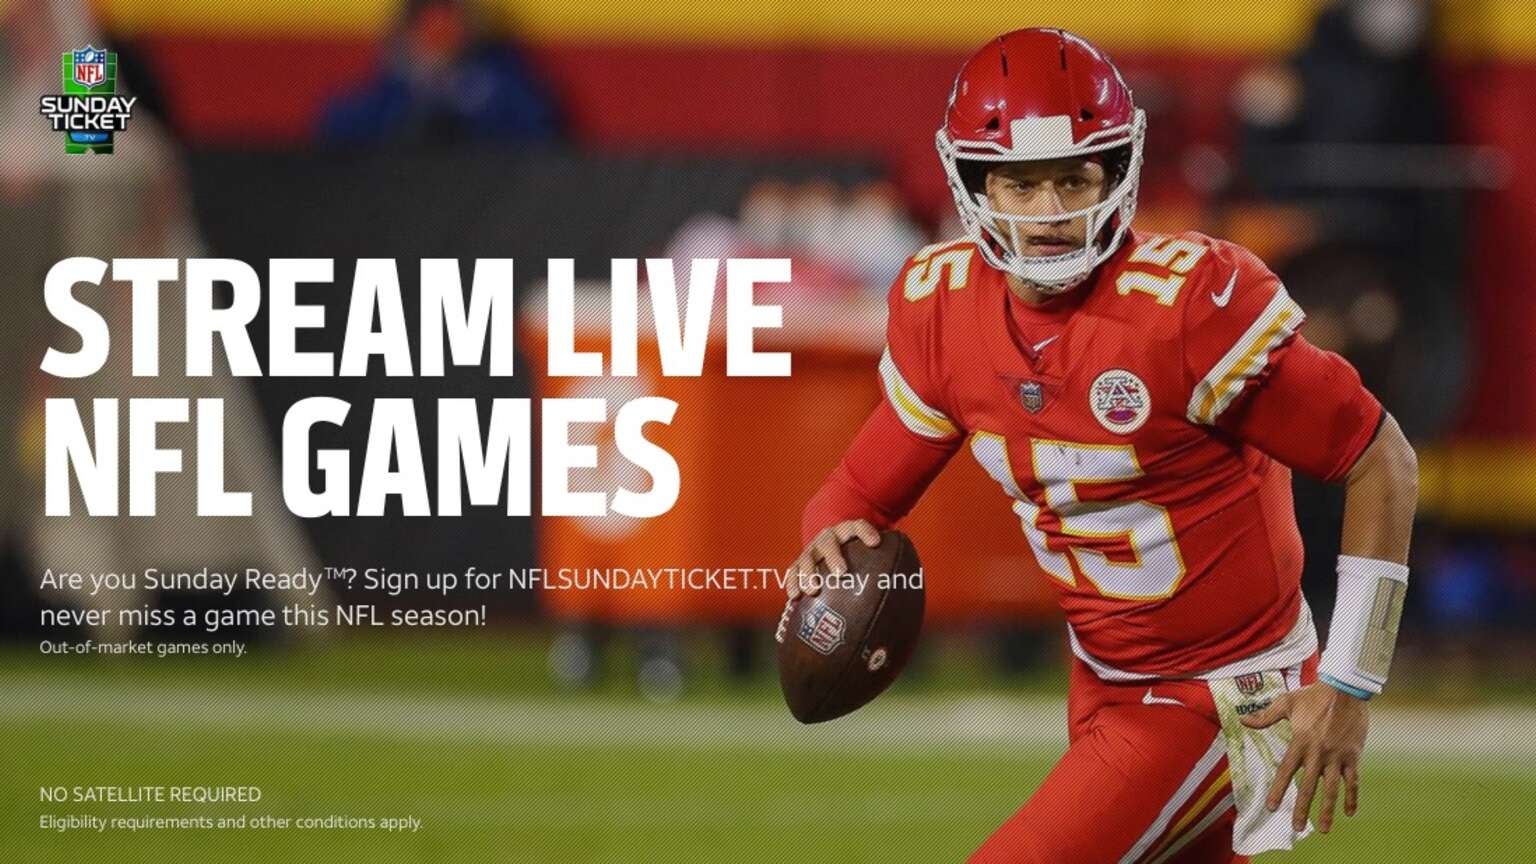 Nfl Sunday Ticket 2021 Streaming Plans Unveiled With Same Pricing But Adds Recent Grad Plan The Streamable